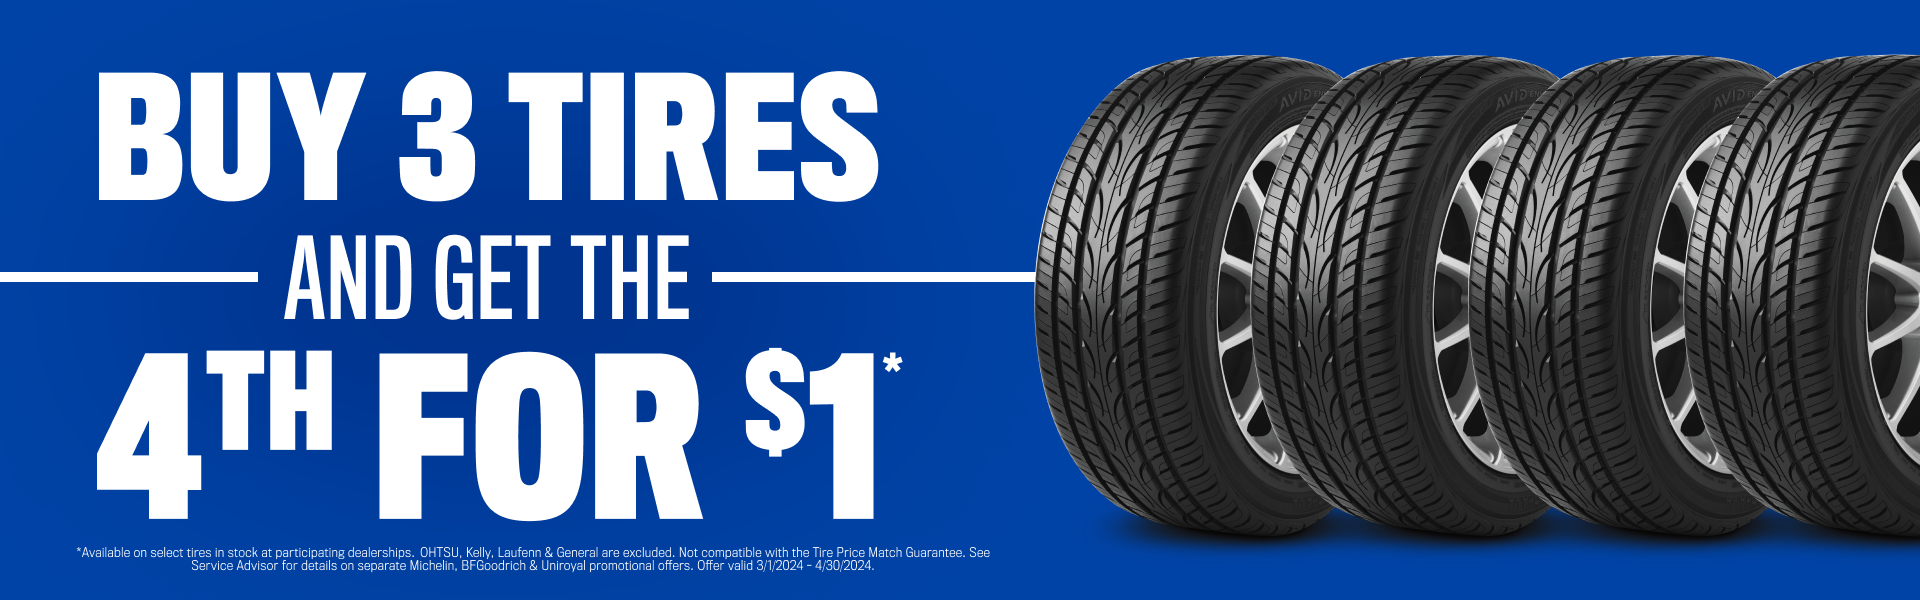 Buy 3 Tires Get 4th For $1